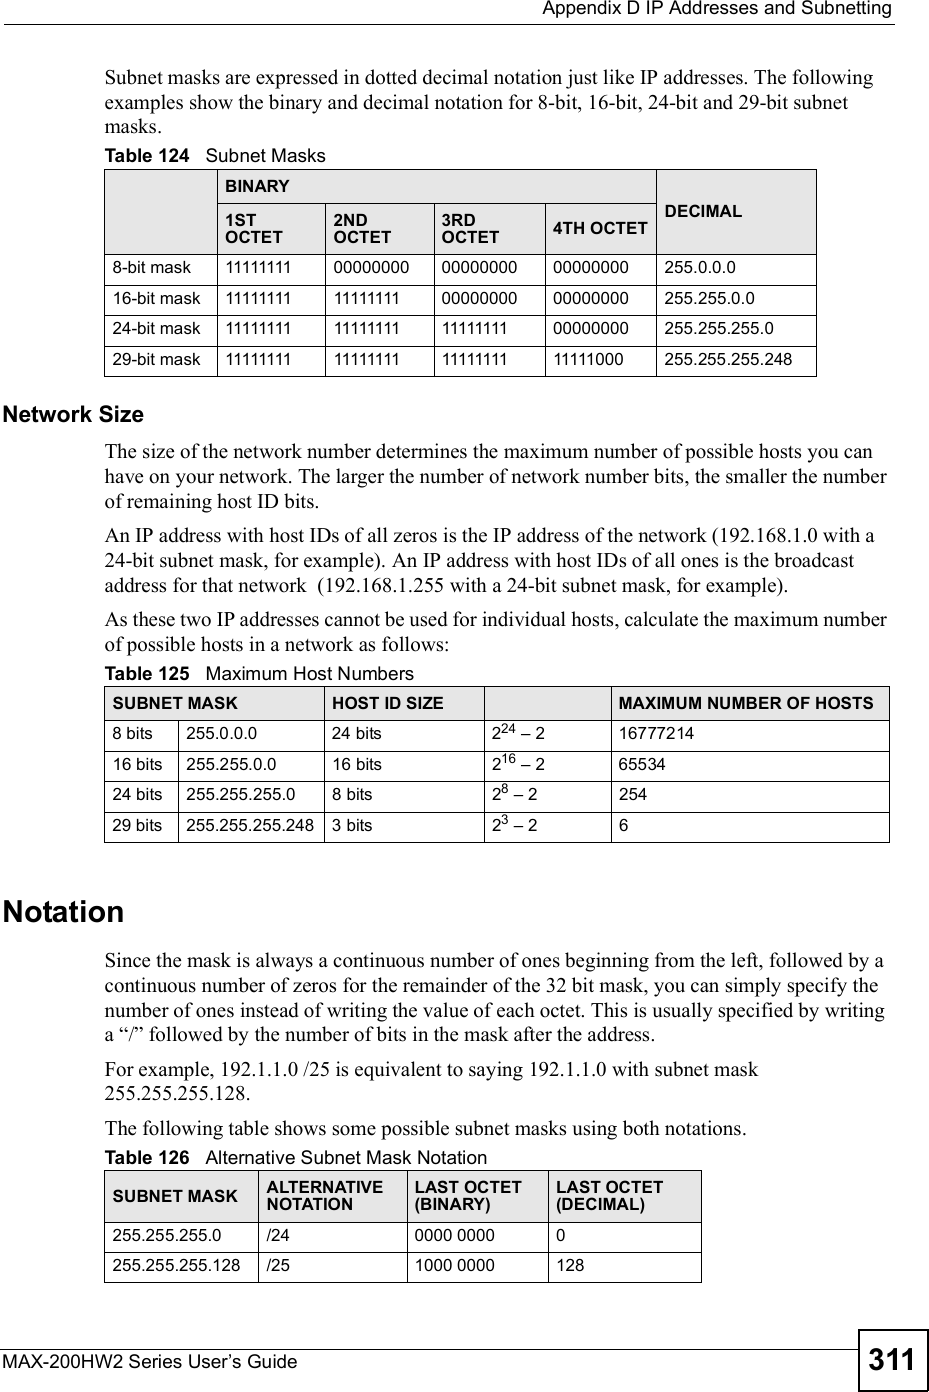  Appendix DIP Addresses and SubnettingMAX-200HW2 Series User s Guide 311Subnet masks are expressed in dotted decimal notation just like IP addresses. The following examples show the binary and decimal notation for 8-bit, 16-bit, 24-bit and 29-bit subnet masks. Network SizeThe size of the network number determines the maximum number of possible hosts you can have on your network. The larger the number of network number bits, the smaller the number of remaining host ID bits. An IP address with host IDs of all zeros is the IP address of the network (192.168.1.0 with a 24-bit subnet mask, for example). An IP address with host IDs of all ones is the broadcast address for that network  (192.168.1.255 with a 24-bit subnet mask, for example).As these two IP addresses cannot be used for individual hosts, calculate the maximum number of possible hosts in a network as follows:NotationSince the mask is always a continuous number of ones beginning from the left, followed by a continuous number of zeros for the remainder of the 32 bit mask, you can simply specify the number of ones instead of writing the value of each octet. This is usually specified by writing a &quot;/# followed by the number of bits in the mask after the address. For example, 192.1.1.0 /25 is equivalent to saying 192.1.1.0 with subnet mask 255.255.255.128. The following table shows some possible subnet masks using both notations. Table 124   Subnet MasksBINARYDECIMAL1ST OCTET2ND OCTET3RD OCTET 4TH OCTET8-bit mask 11111111 00000000 00000000 00000000 255.0.0.016-bit mask 11111111 11111111 00000000 00000000 255.255.0.024-bit mask 11111111 11111111 11111111 00000000 255.255.255.029-bit mask 11111111 11111111 11111111 11111000 255.255.255.248Table 125   Maximum Host NumbersSUBNET MASK HOST ID SIZE MAXIMUM NUMBER OF HOSTS8 bits255.0.0.024 bits224 % 21677721416 bits255.255.0.016 bits216 % 26553424 bits255.255.255.08 bits28 % 225429 bits255.255.255.2483 bits23 % 26Table 126   Alternative Subnet Mask NotationSUBNET MASK ALTERNATIVE NOTATIONLAST OCTET (BINARY)LAST OCTET (DECIMAL)255.255.255.0 /24 0000 0000 0255.255.255.128 /25 1000 0000 128